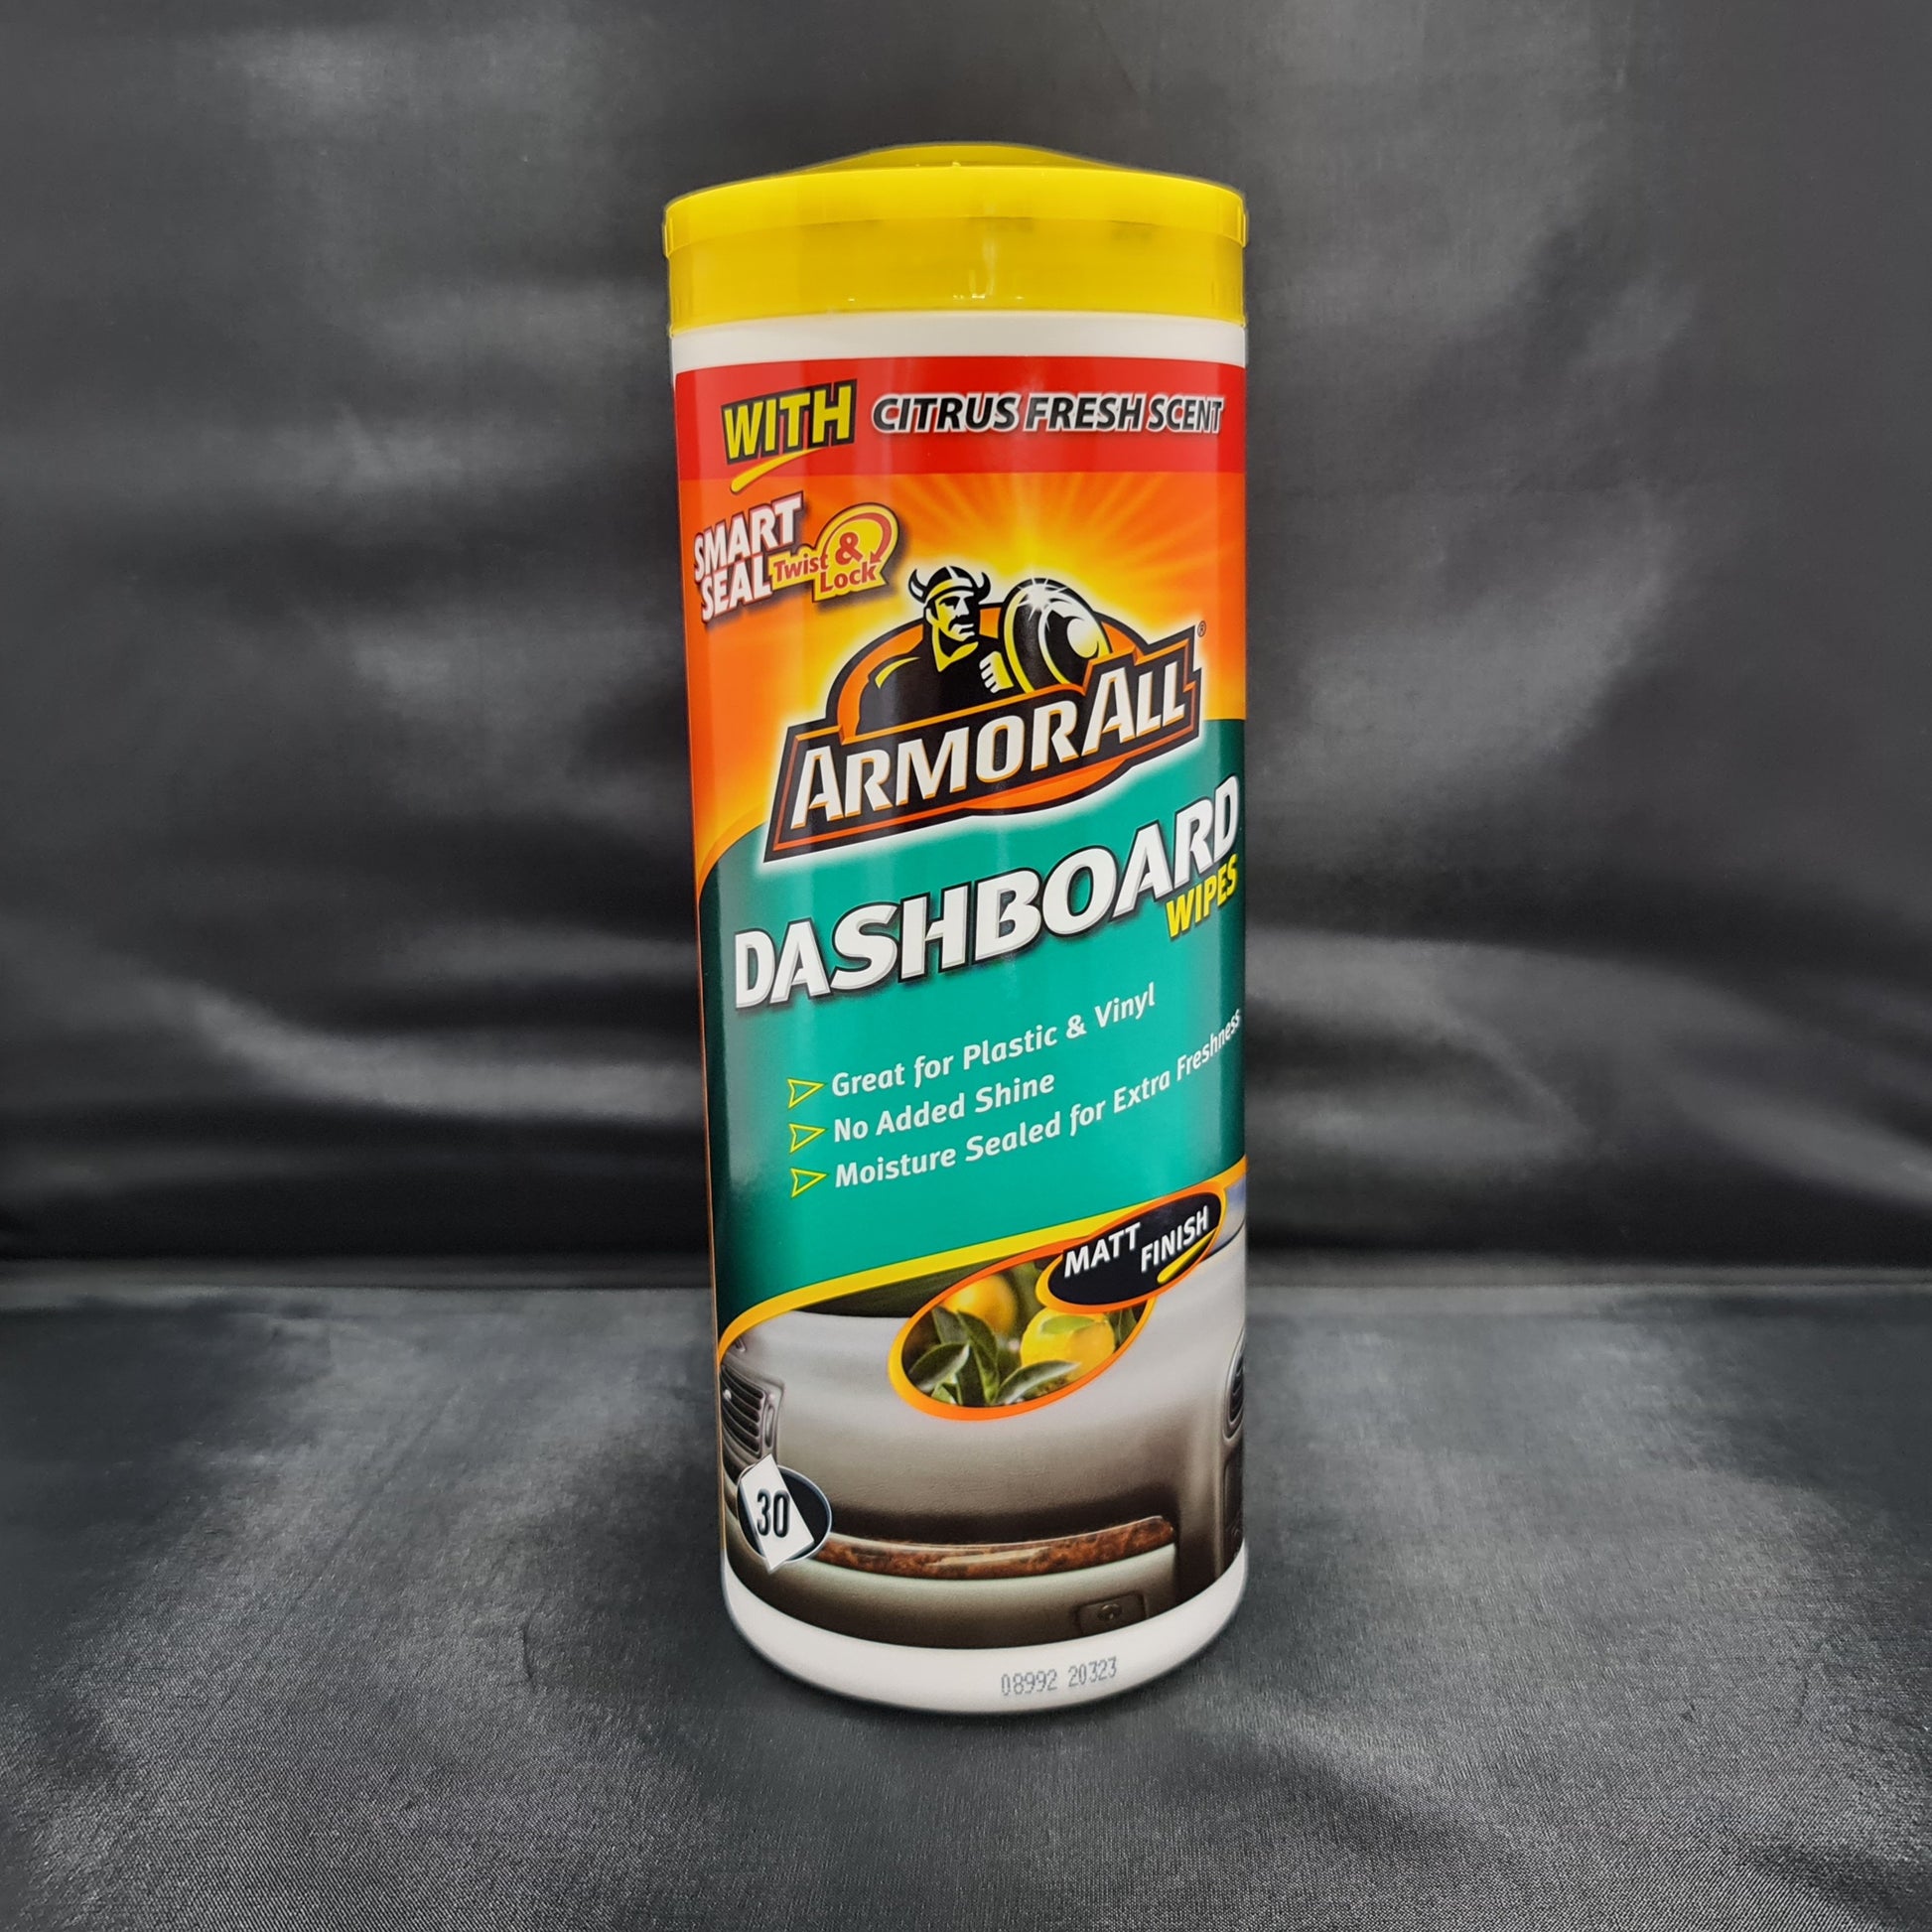 Armorall dashboard wipes